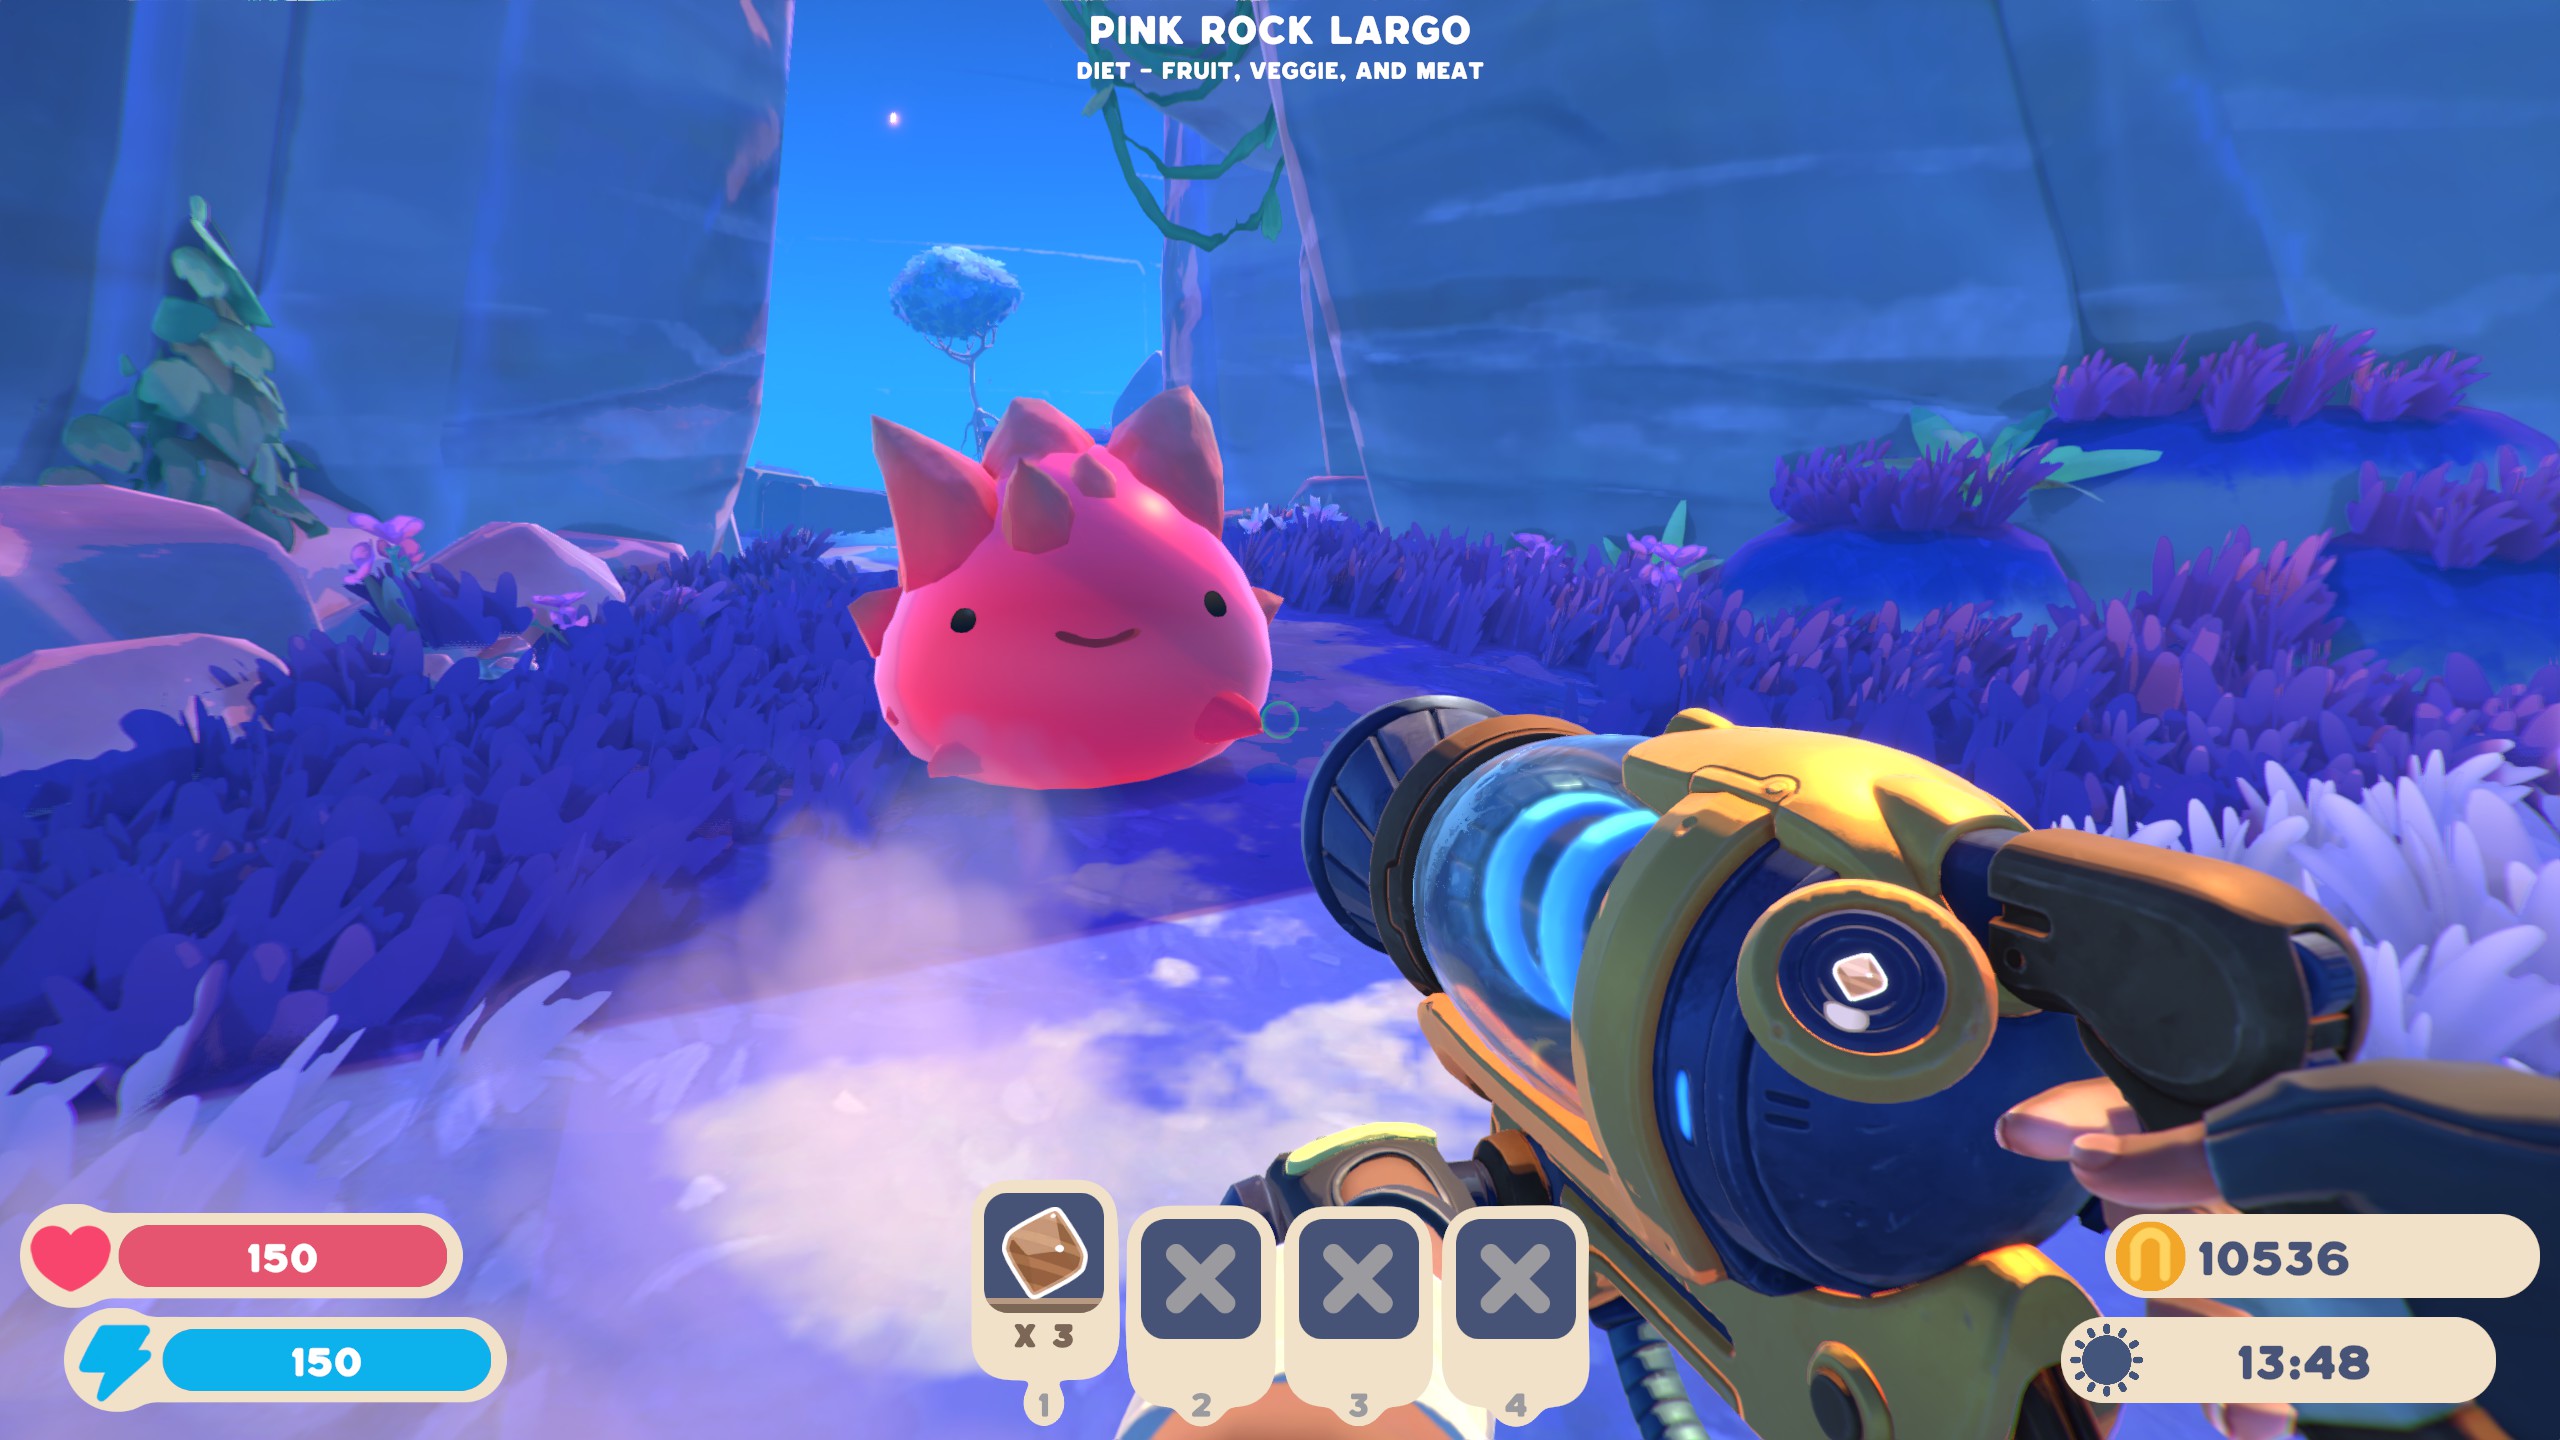 Slime Rancher 2 All Largo Slime Combinations - Pink - F3E42D0